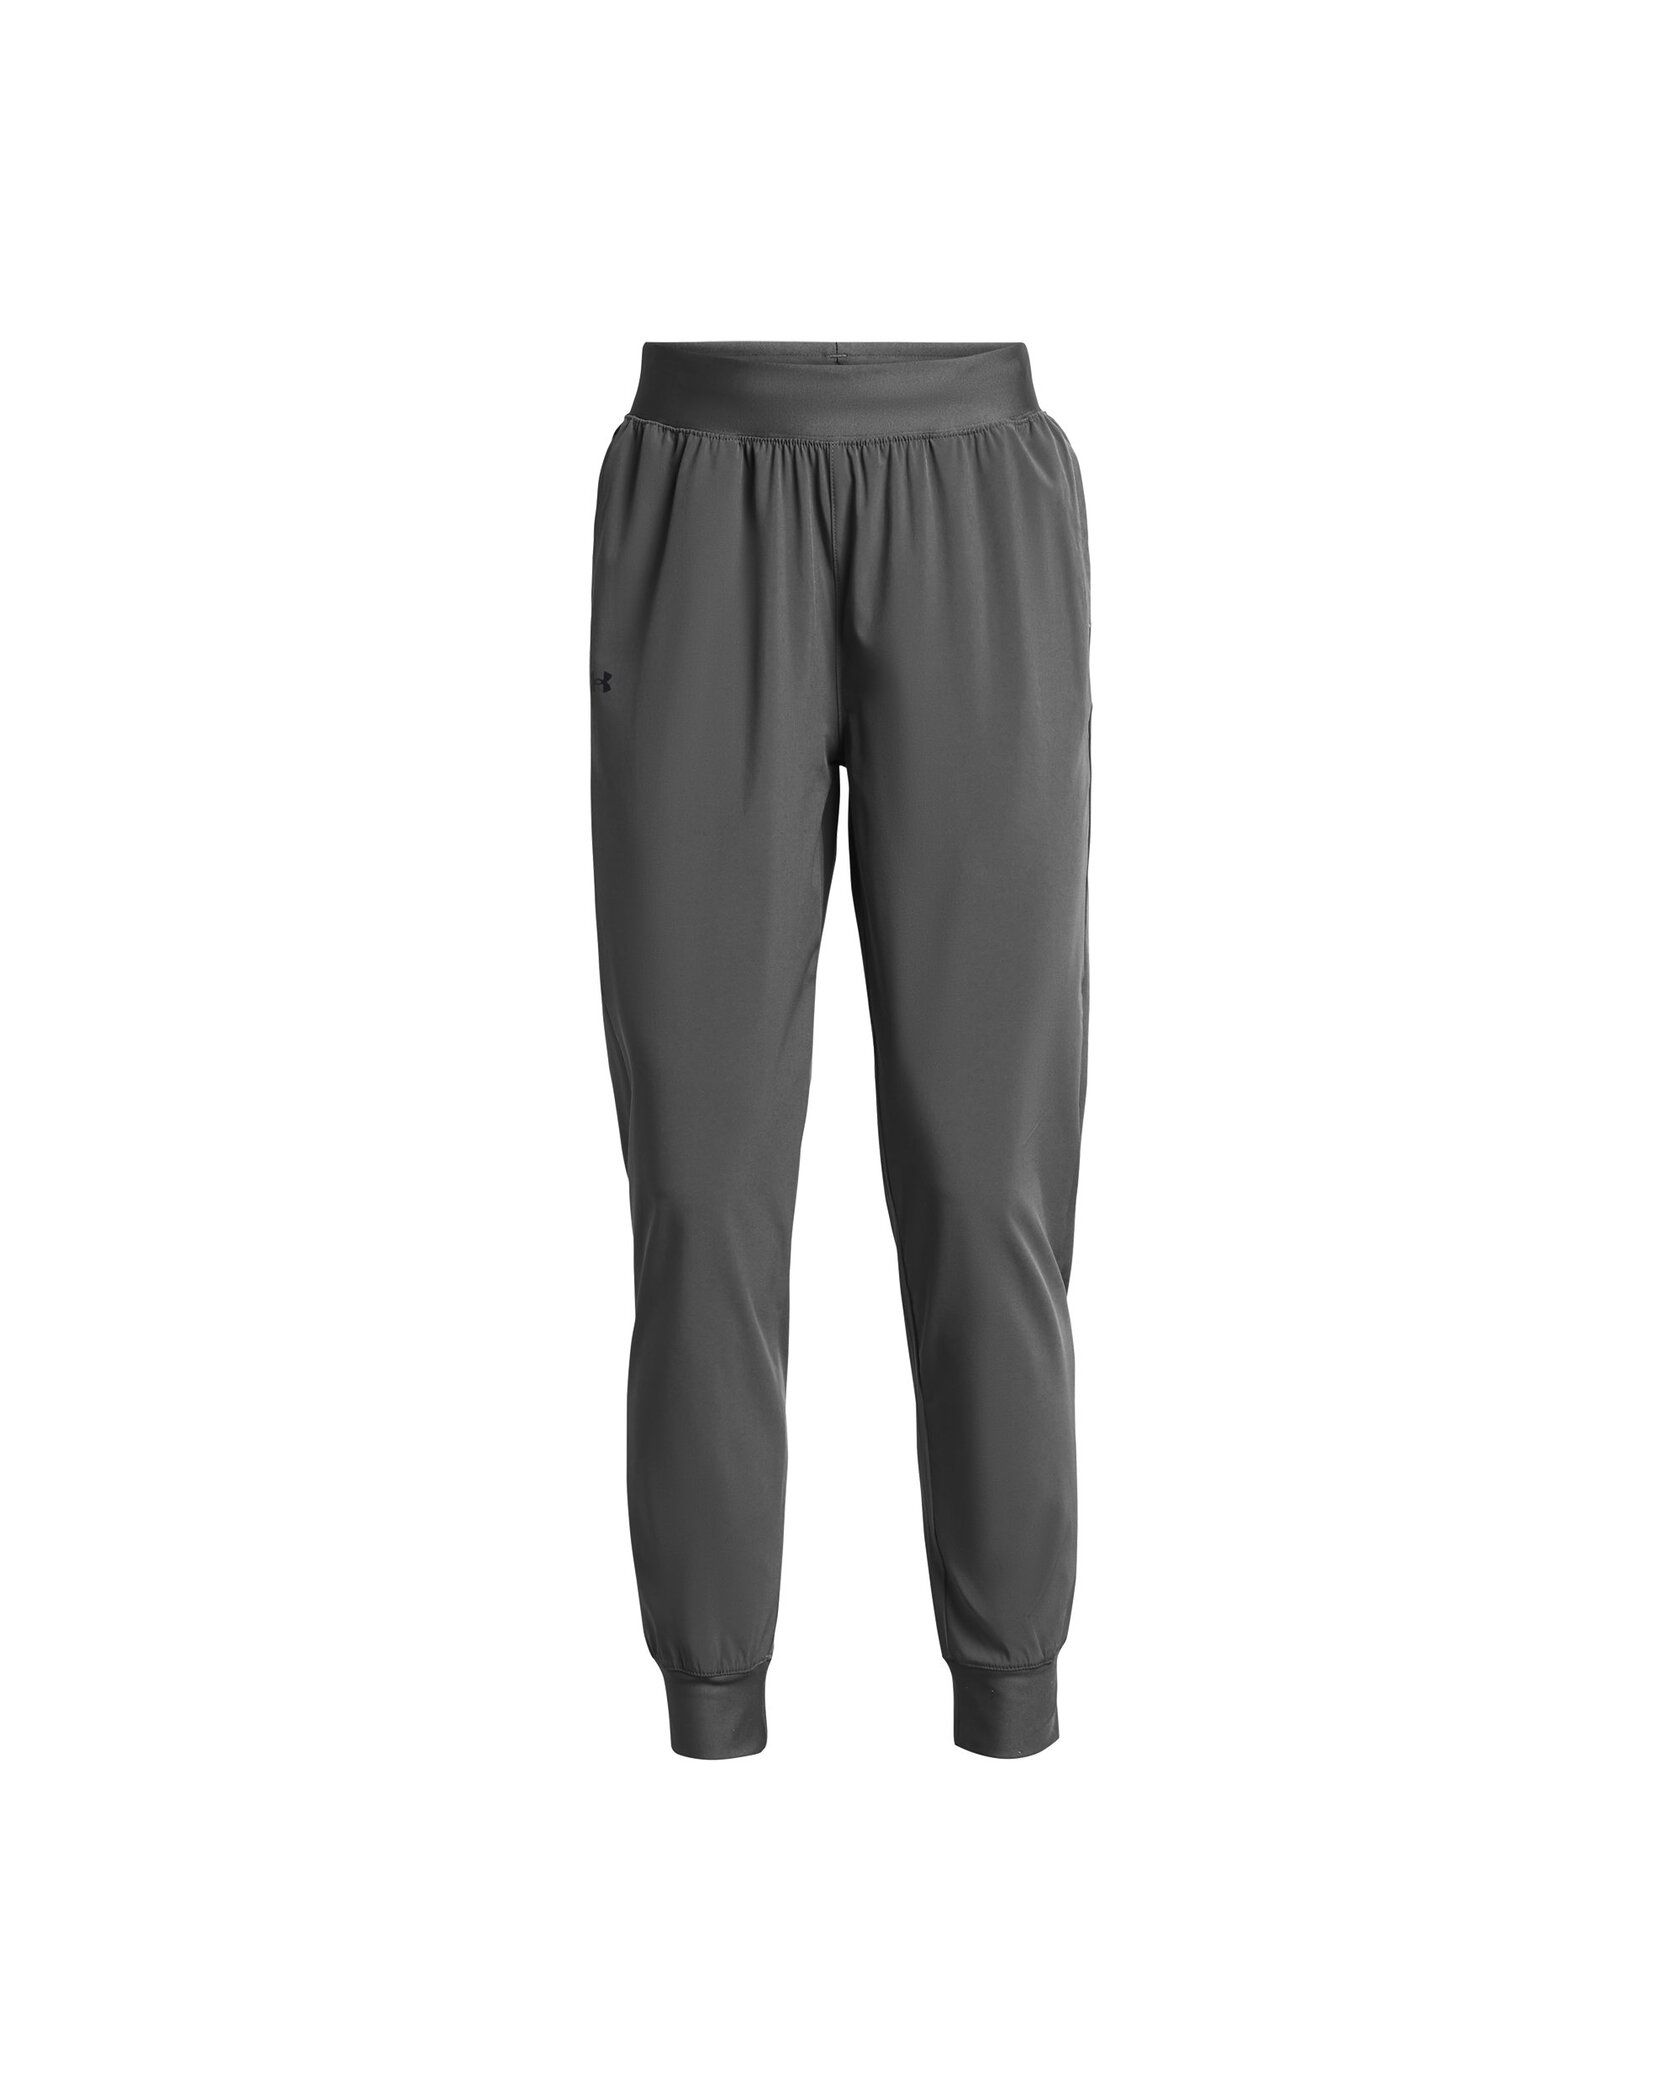 BHS Under Armour Women's Squad Woven Warm-Up Pant - Graphite